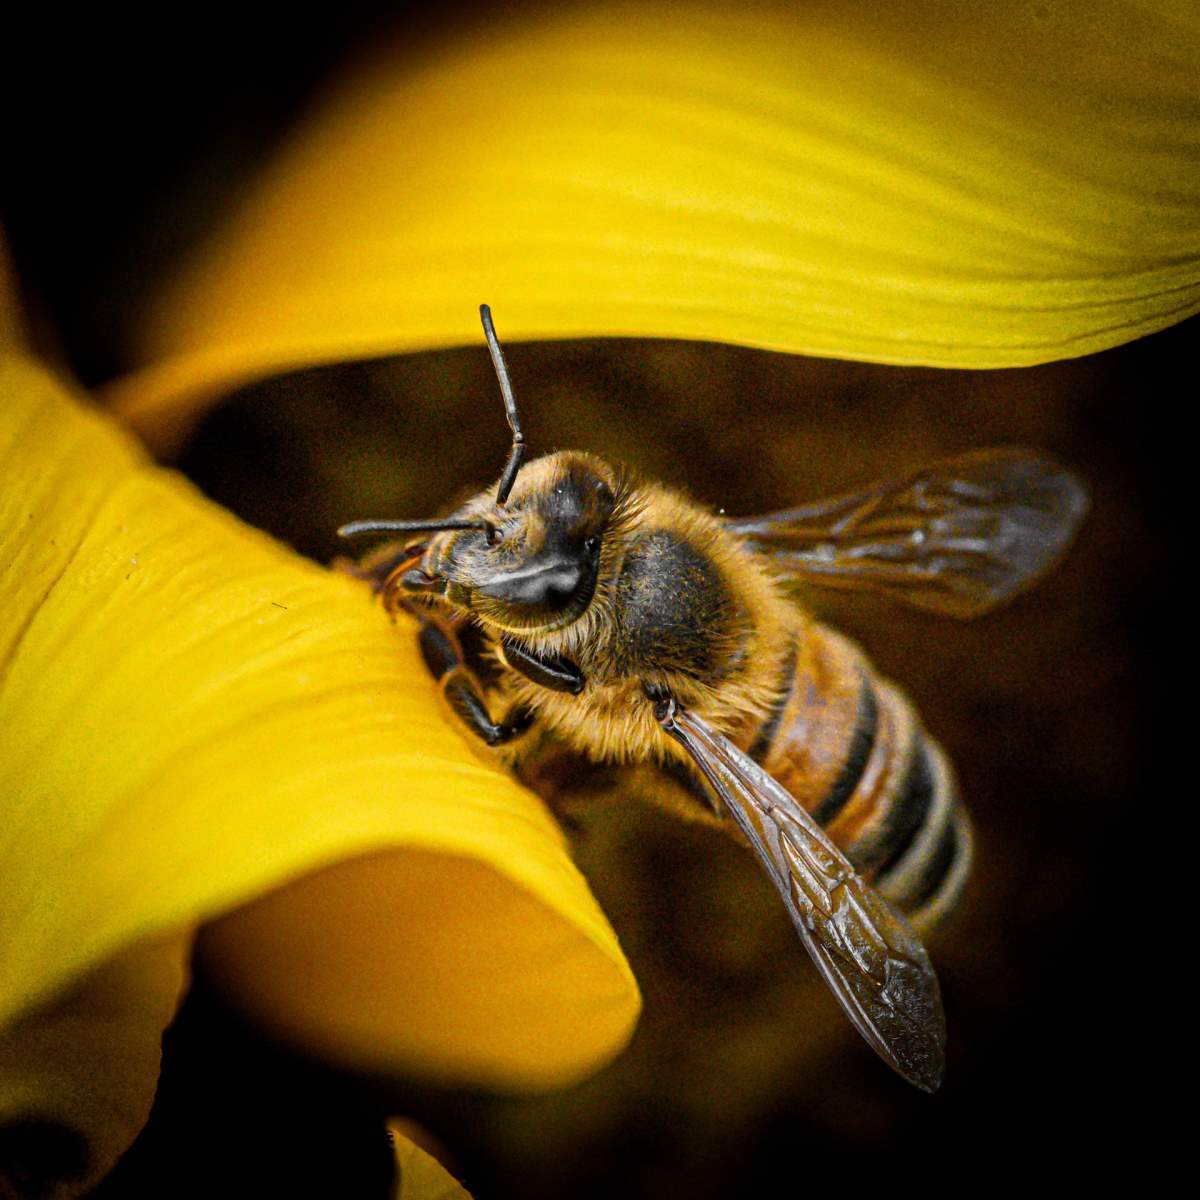 Close-up view of a bee in a yellow flower